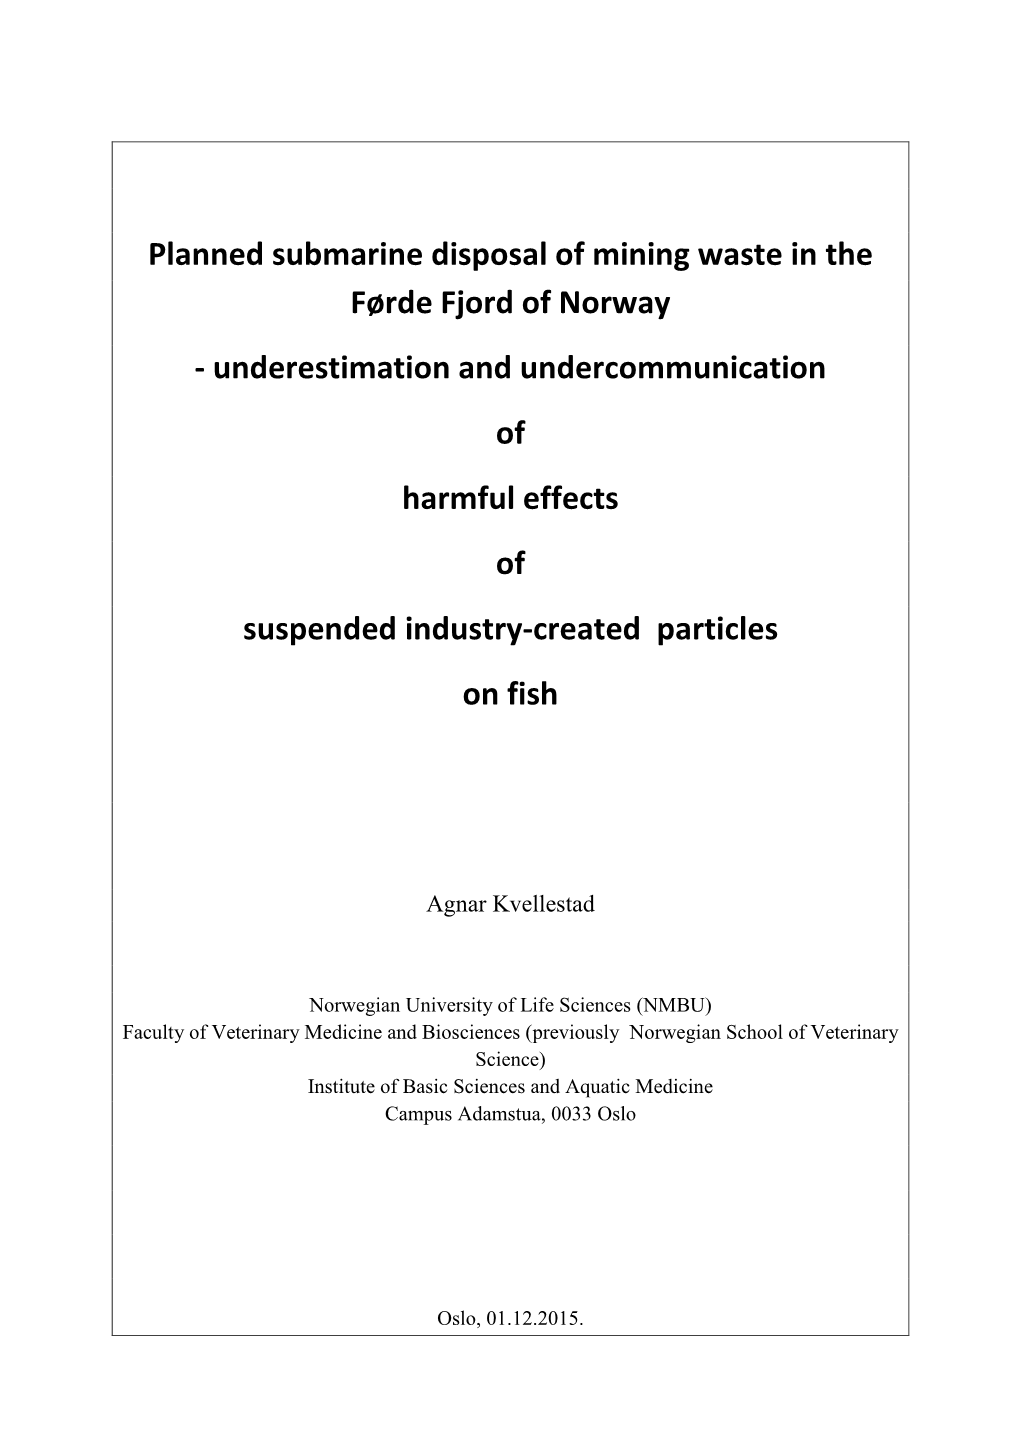 Planned Submarine Disposal of Mining Waste in the Førde Fjord of Norway